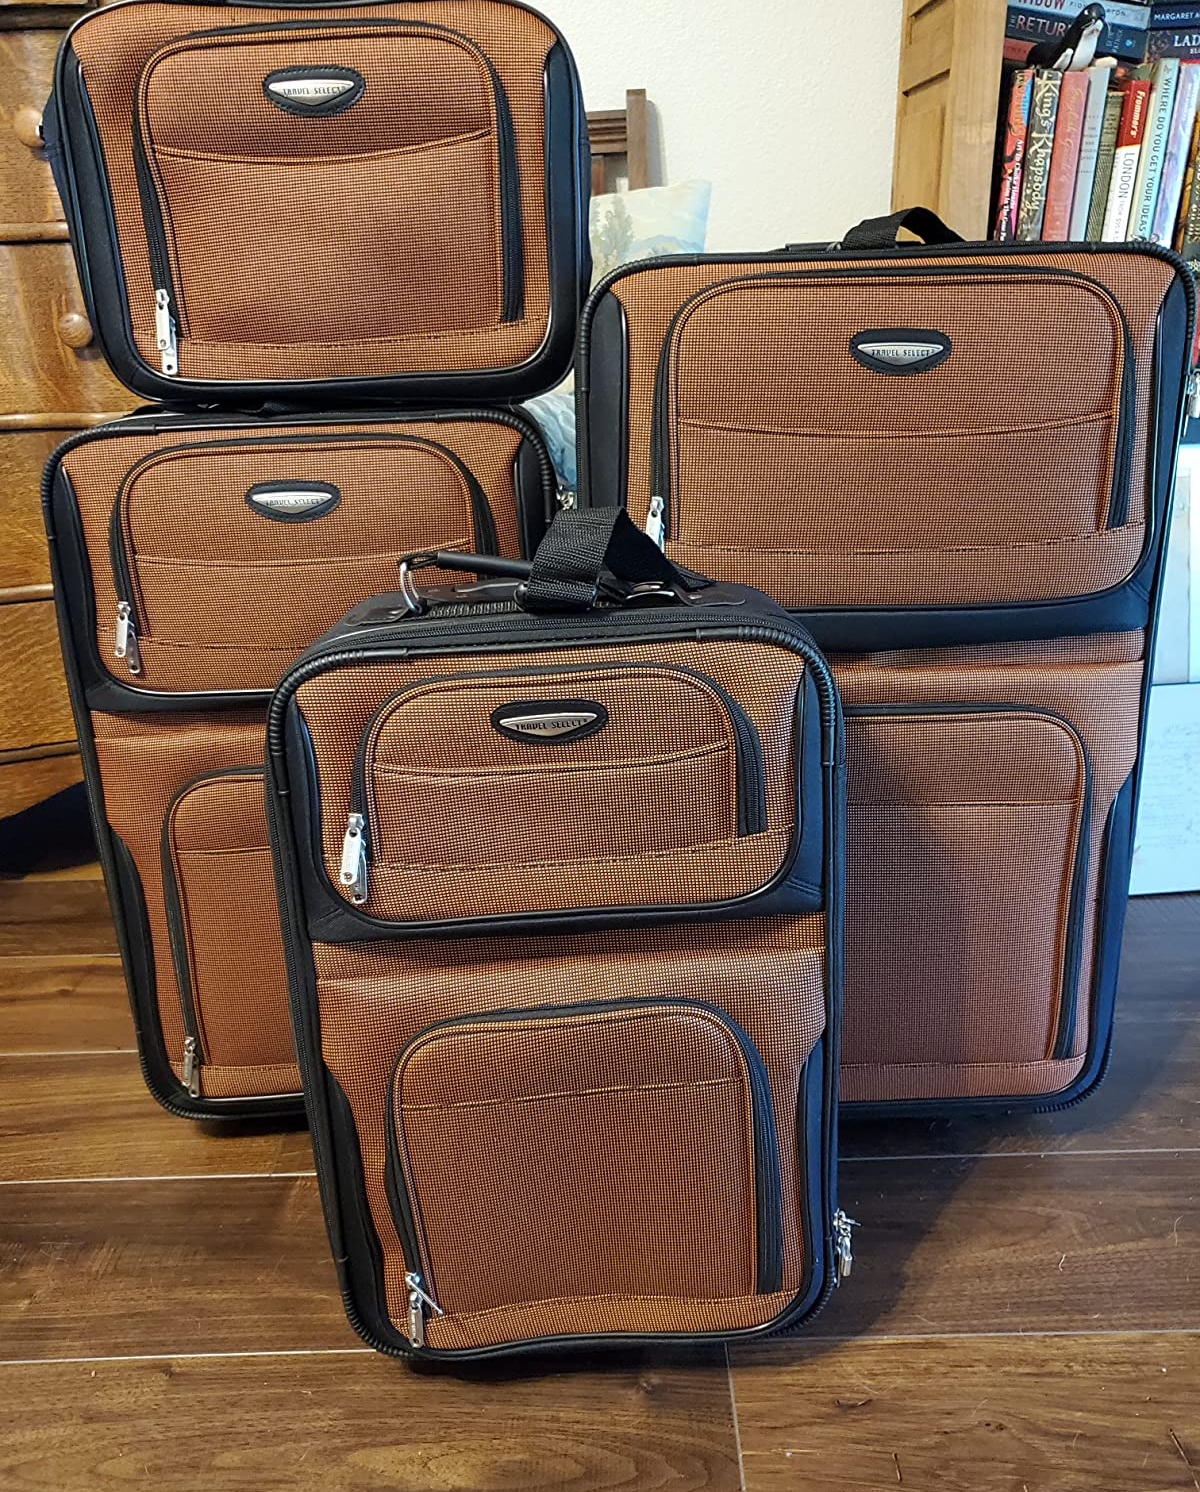 Working on a luggage set with nowhere to go. At least they look